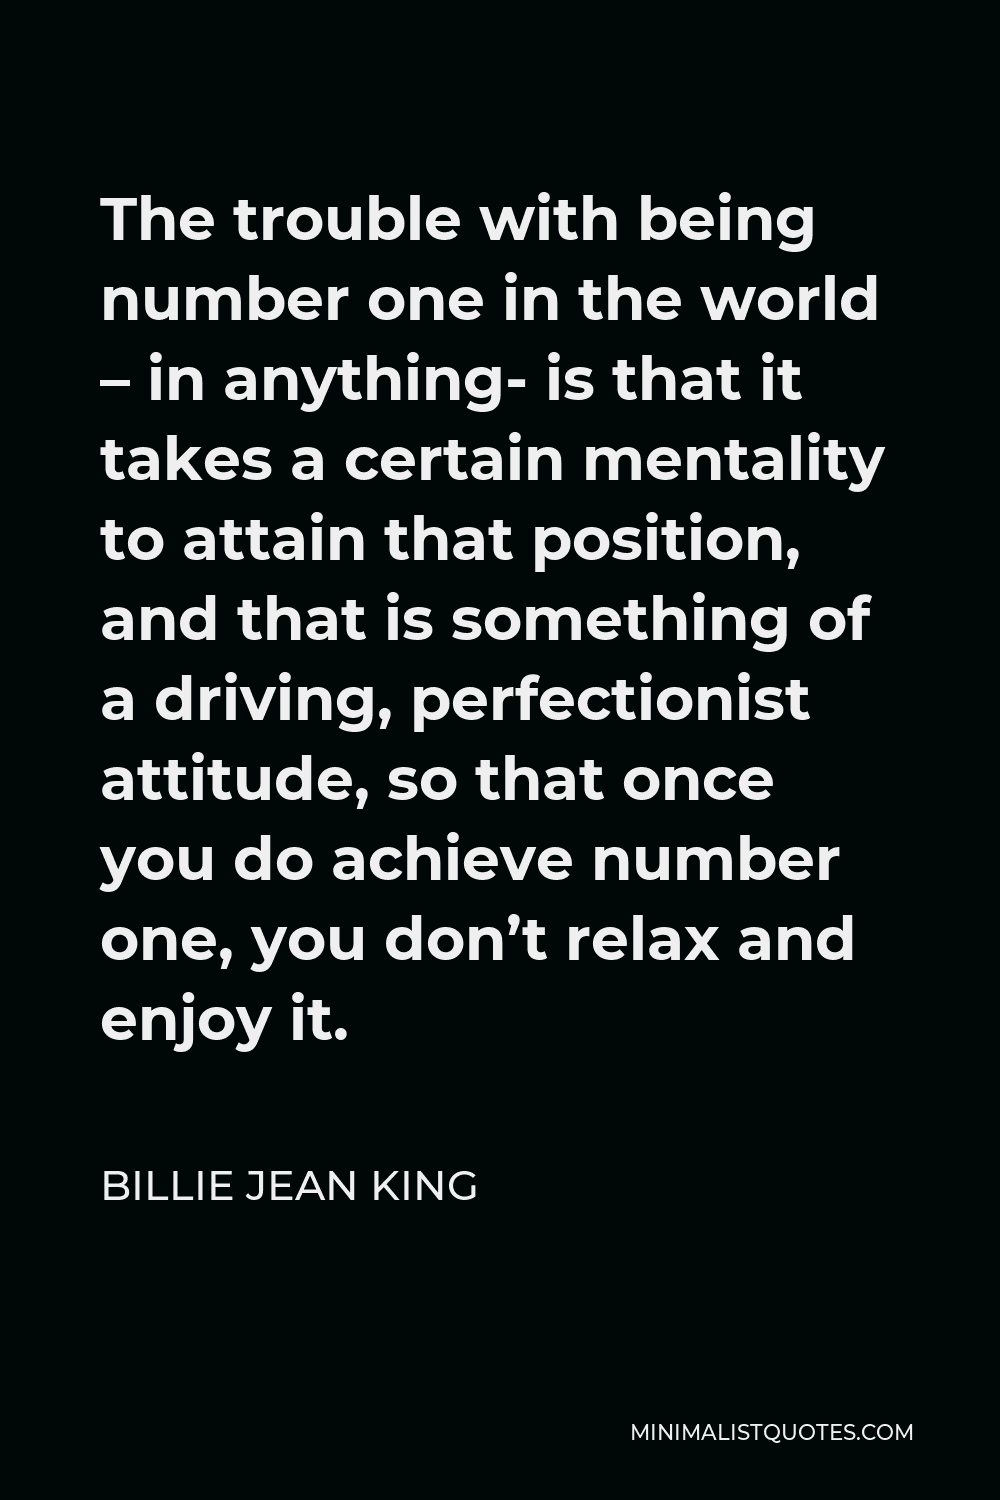 Billie Jean King Quote - The trouble with being number one in the world – in anything- is that it takes a certain mentality to attain that position, and that is something of a driving, perfectionist attitude, so that once you do achieve number one, you don’t relax and enjoy it.